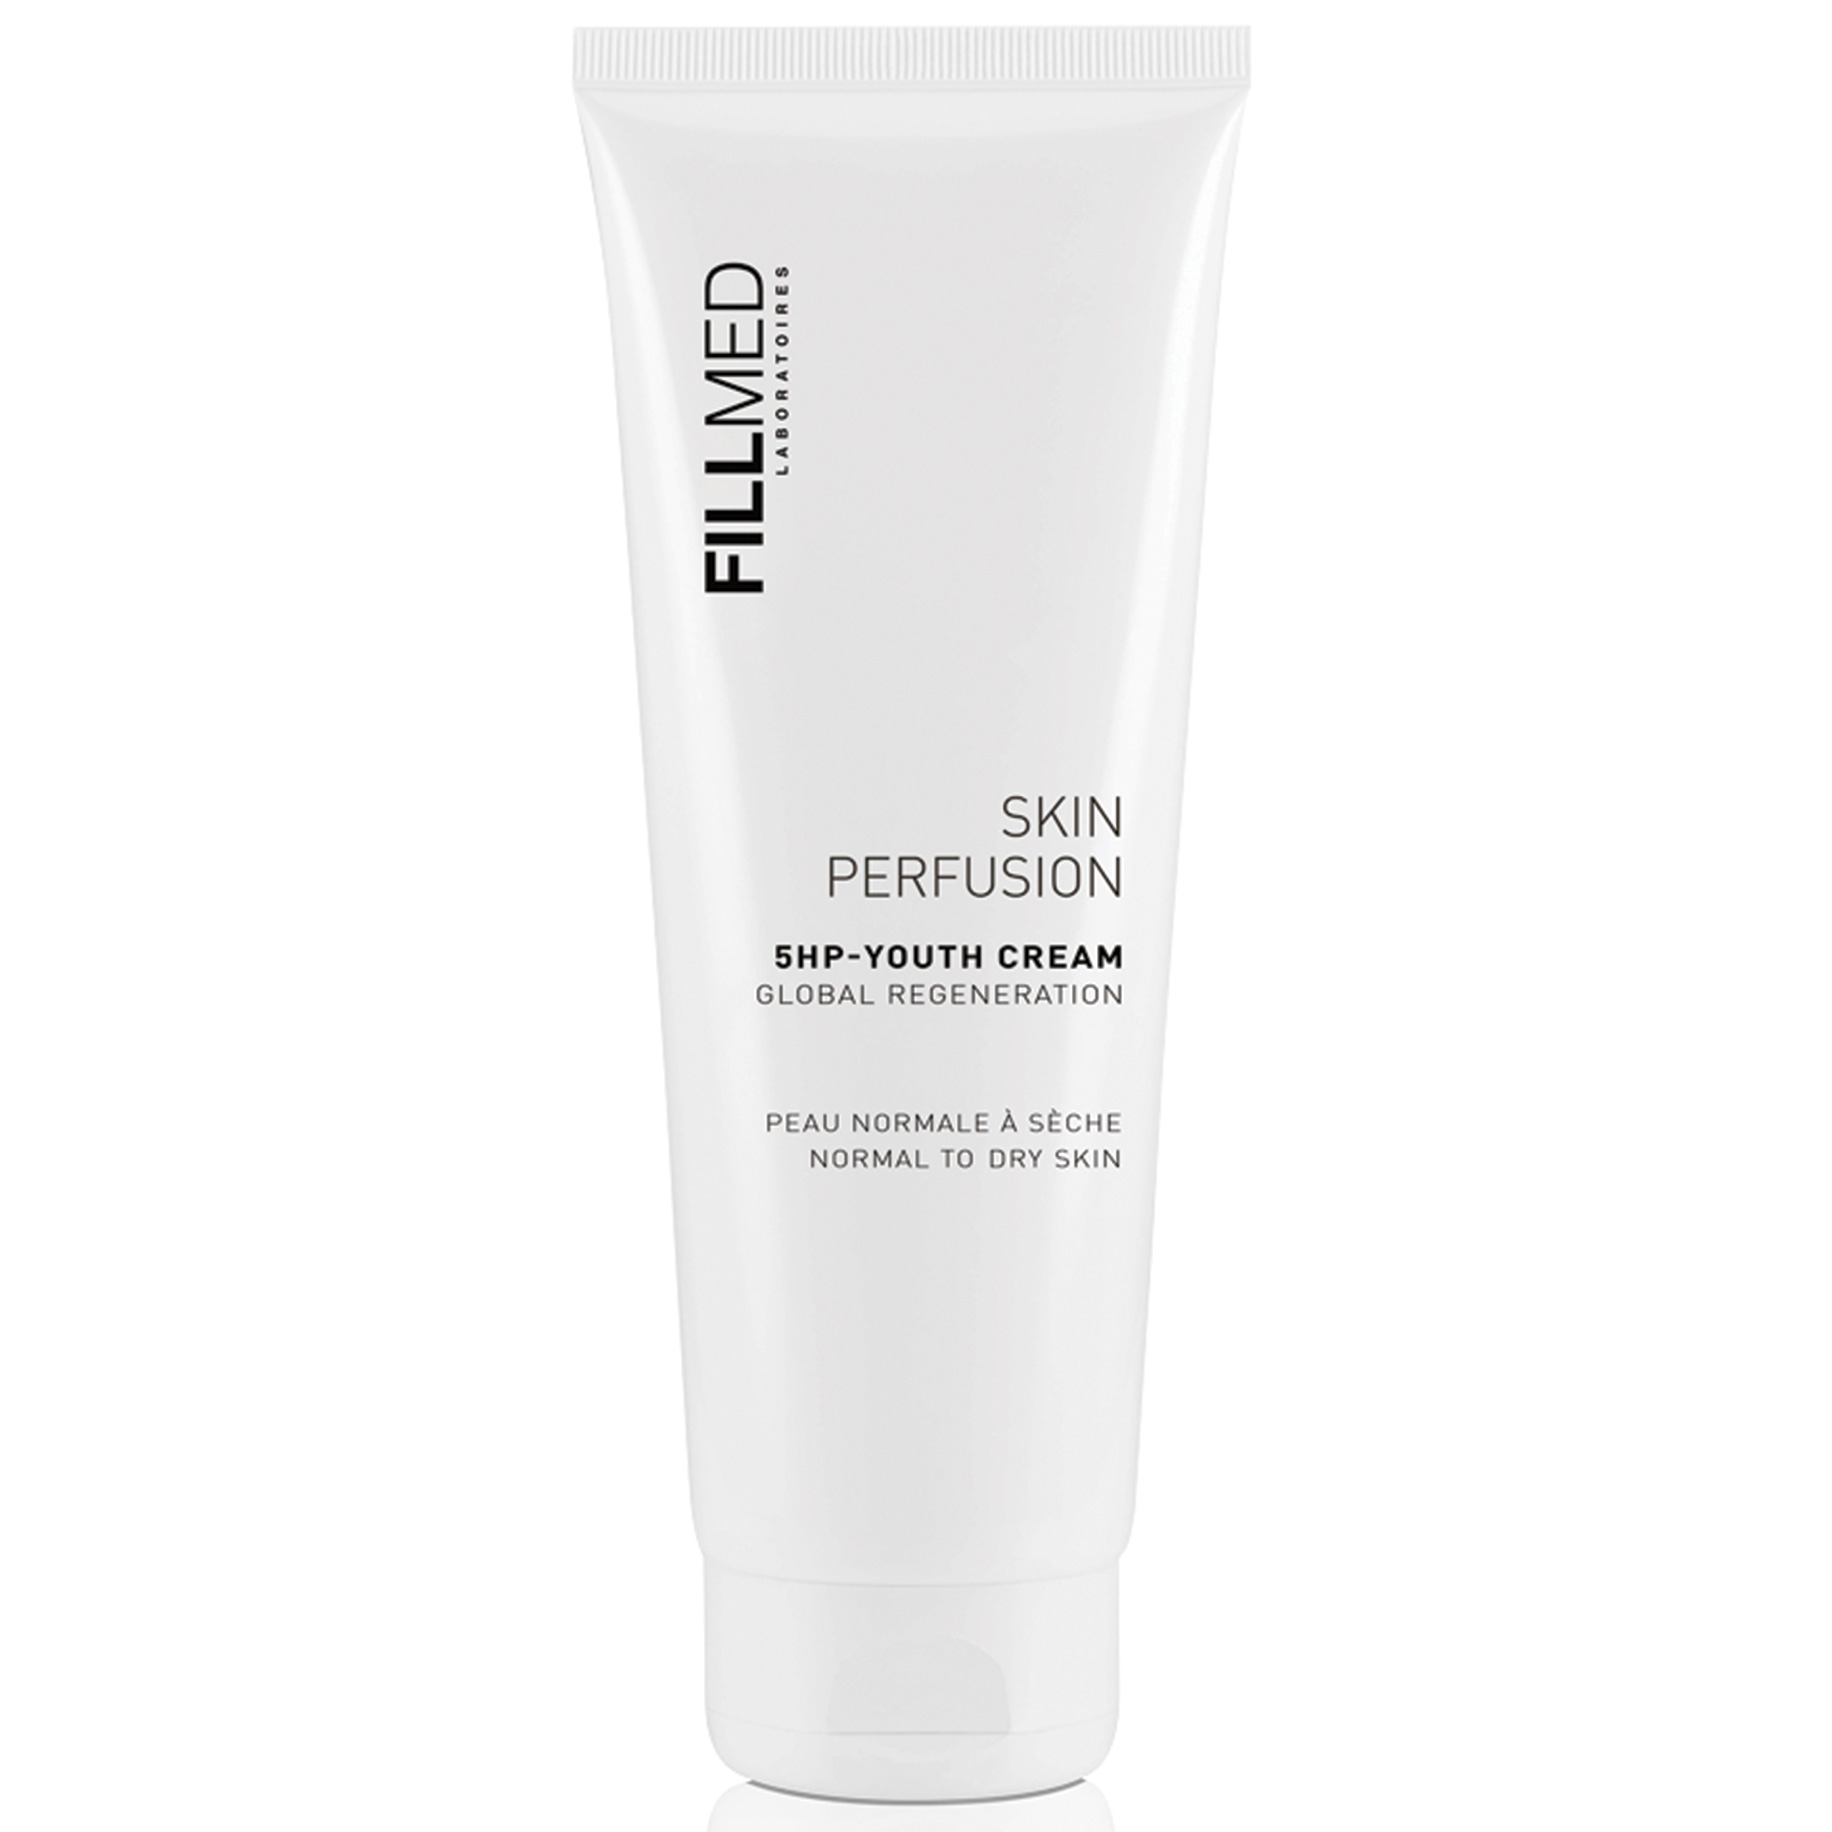 Fillmed Skin Perfusion 5HP-Youth Cream 